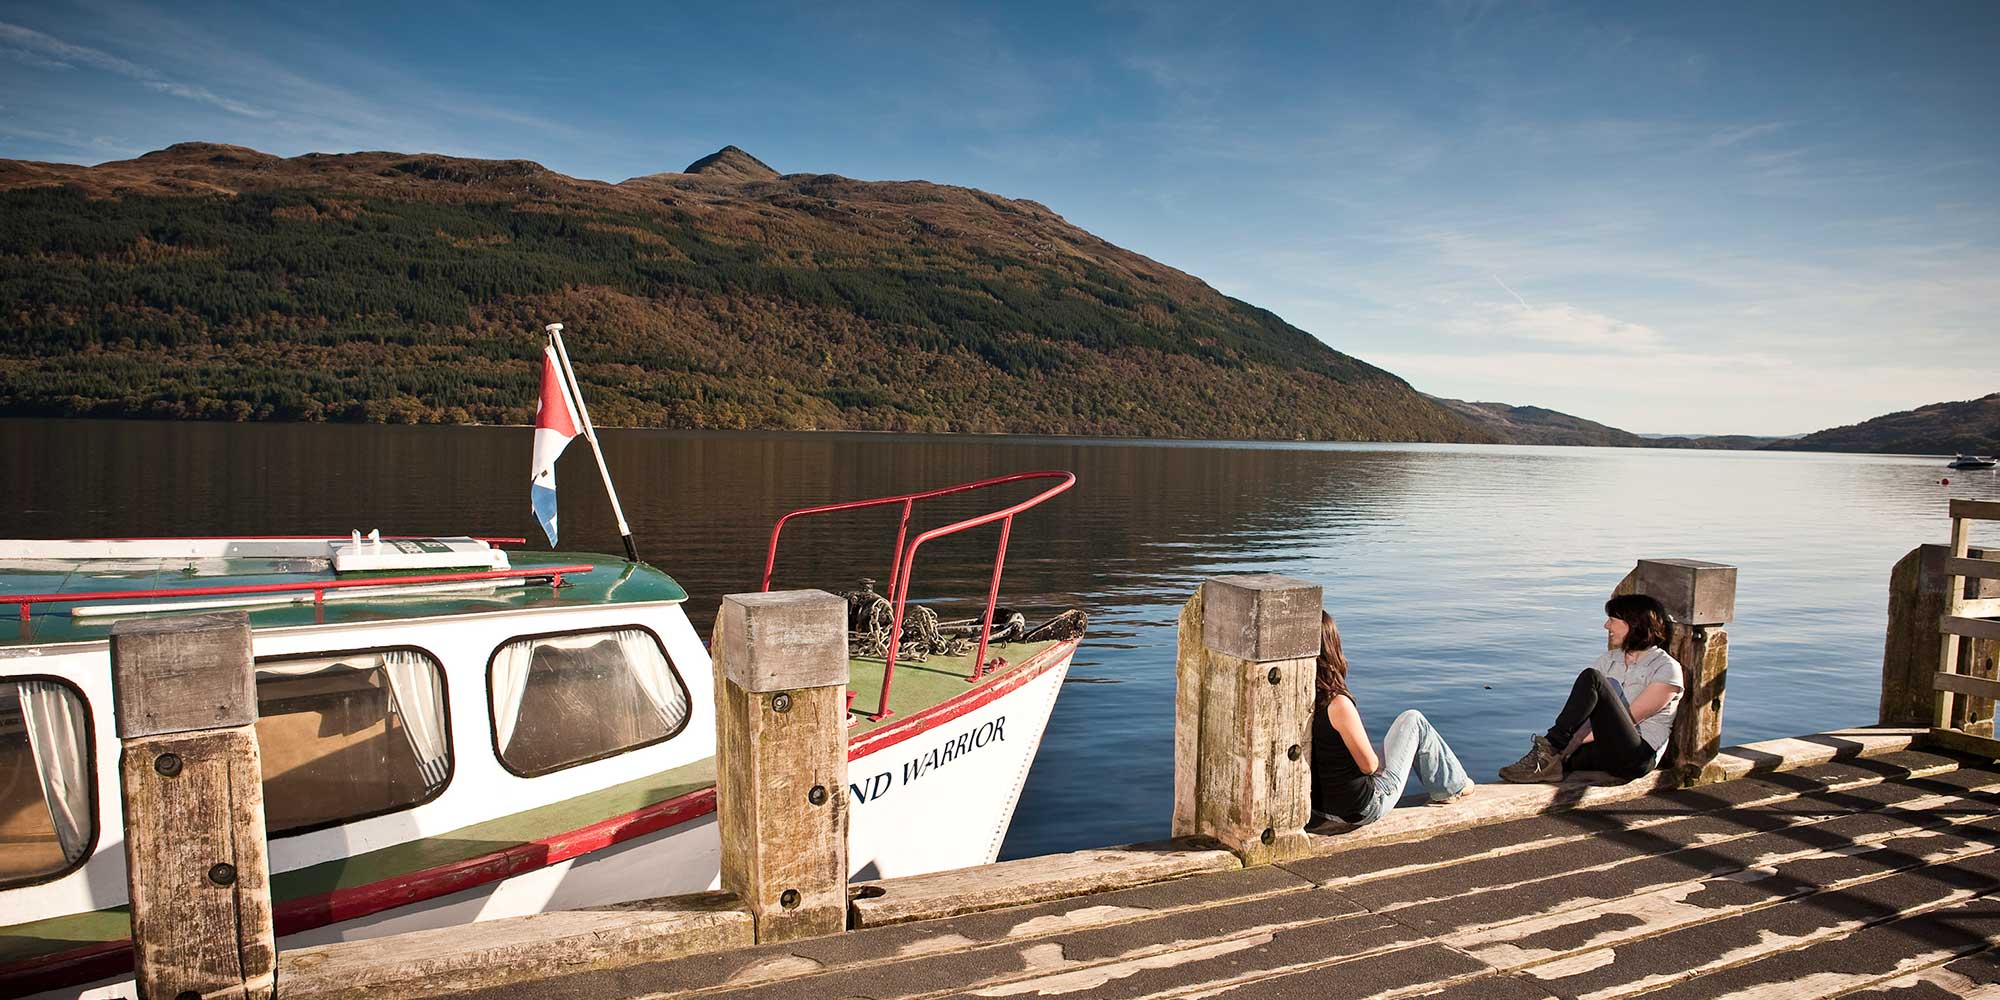 People sitting on a sun-drenched wooden jetty looking over a loch with mountains on the far shore